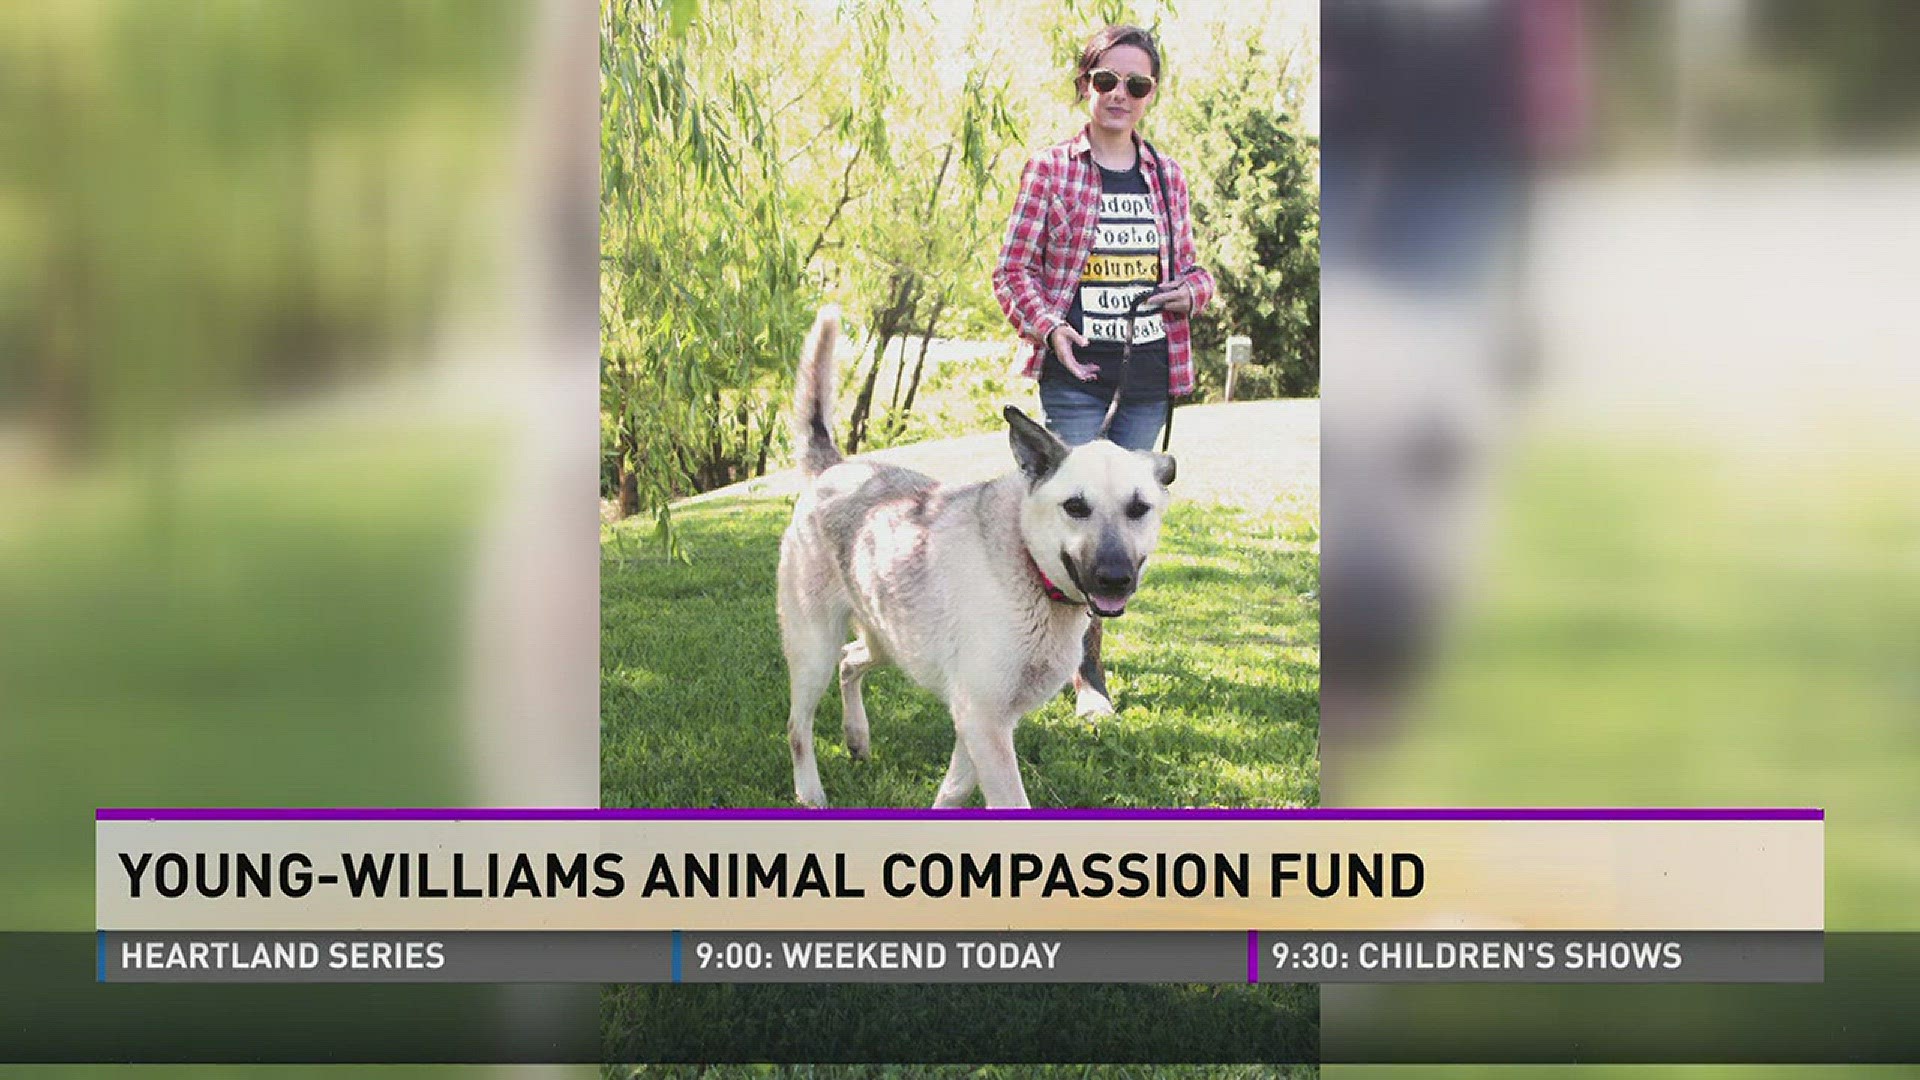 Hannah Overton of Young-Williams stops by to show off the pet of the week, and discuss the compassion fund.